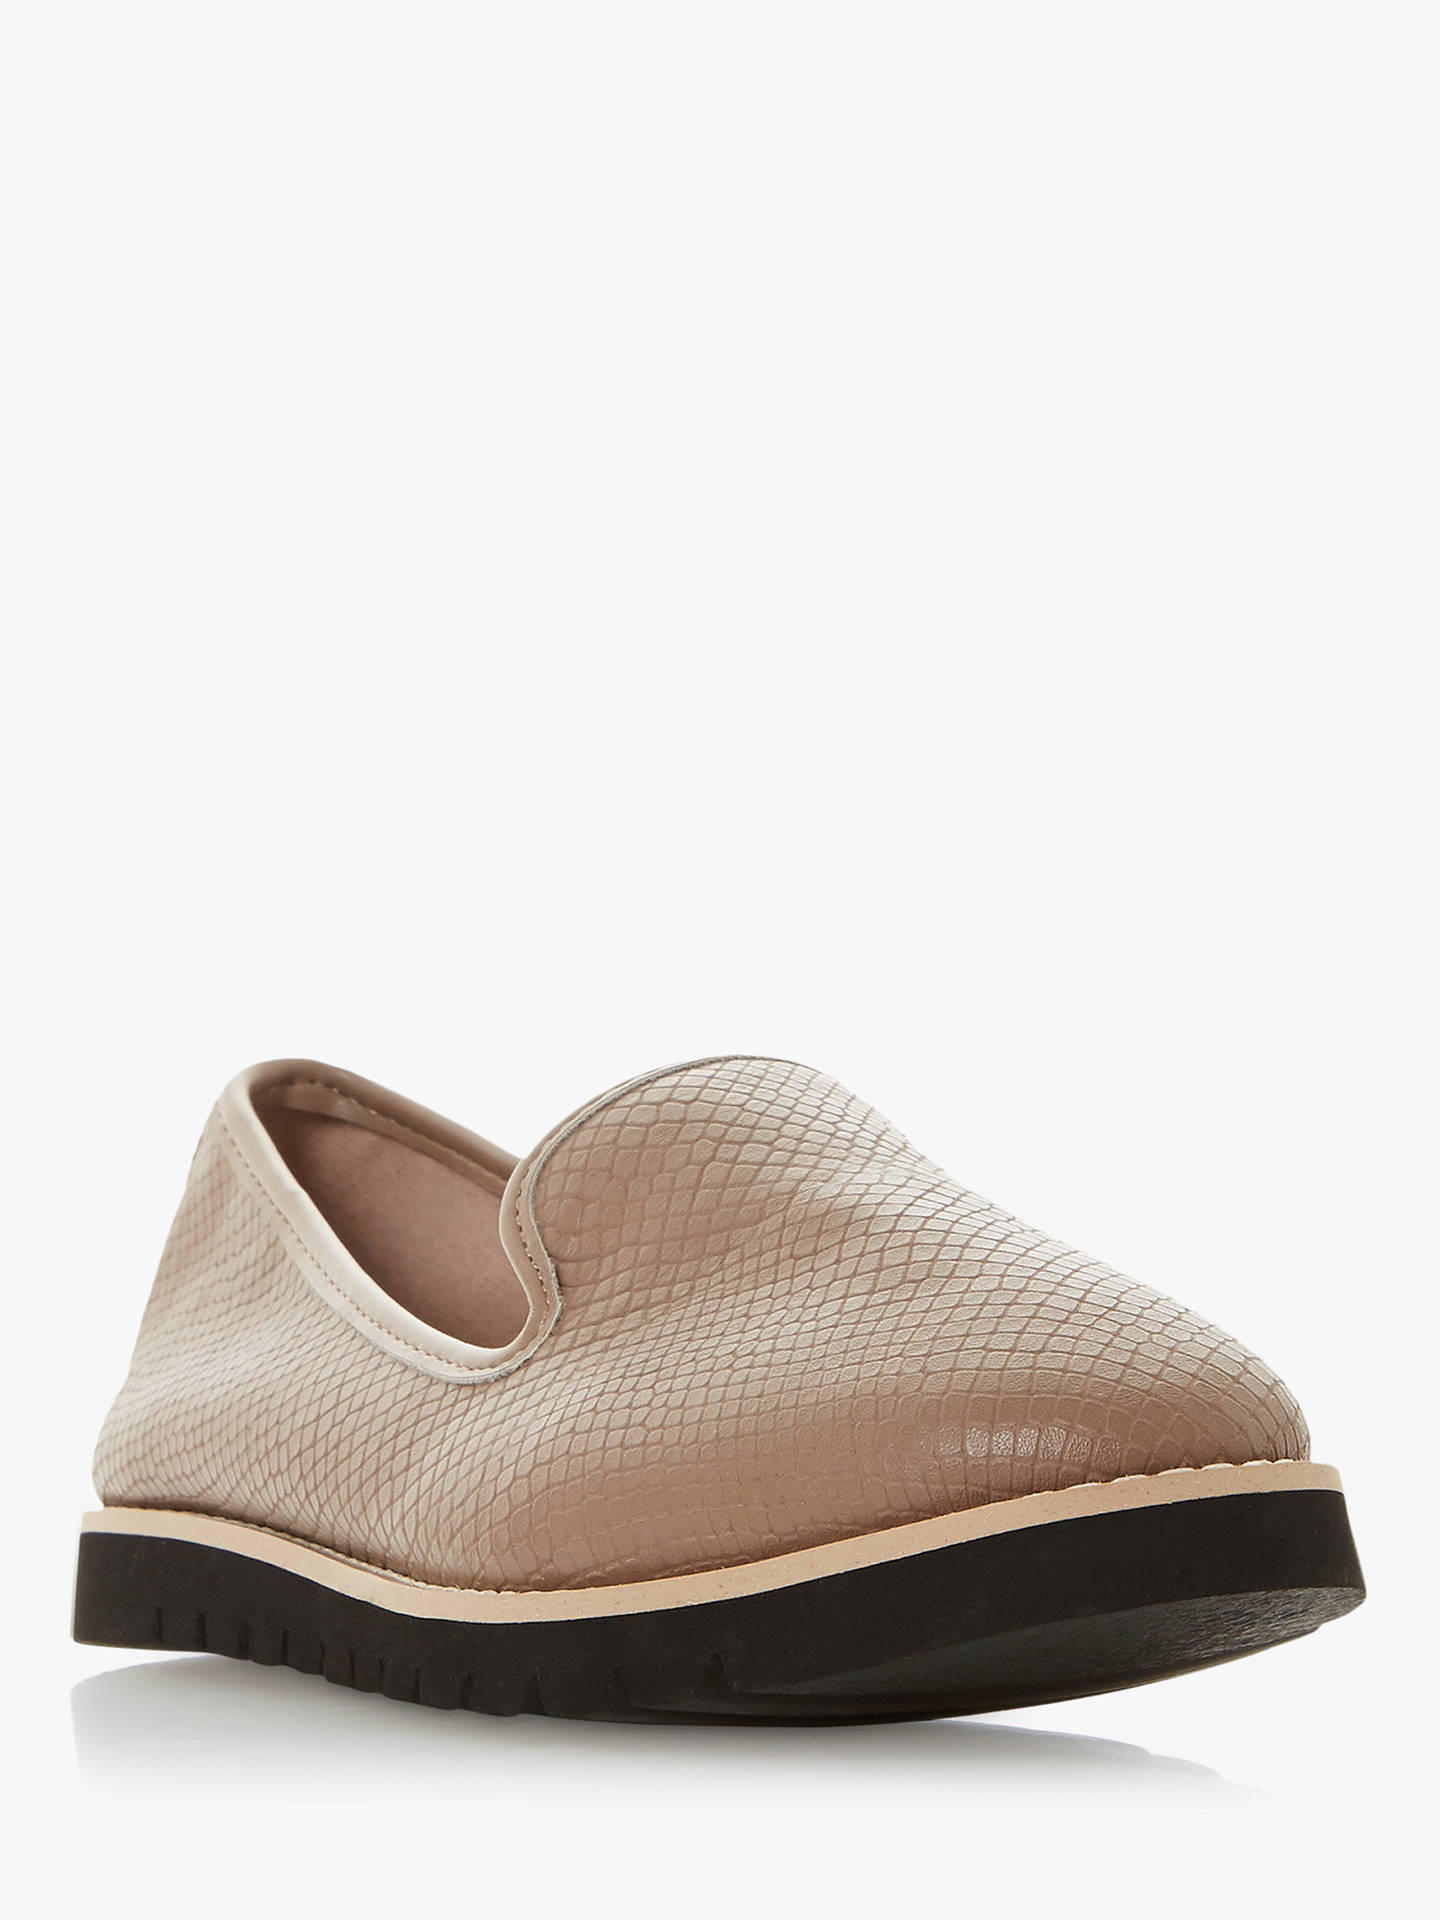 Dune Galleon Ridged Leather Loafers, Taupe at John Lewis & Partners